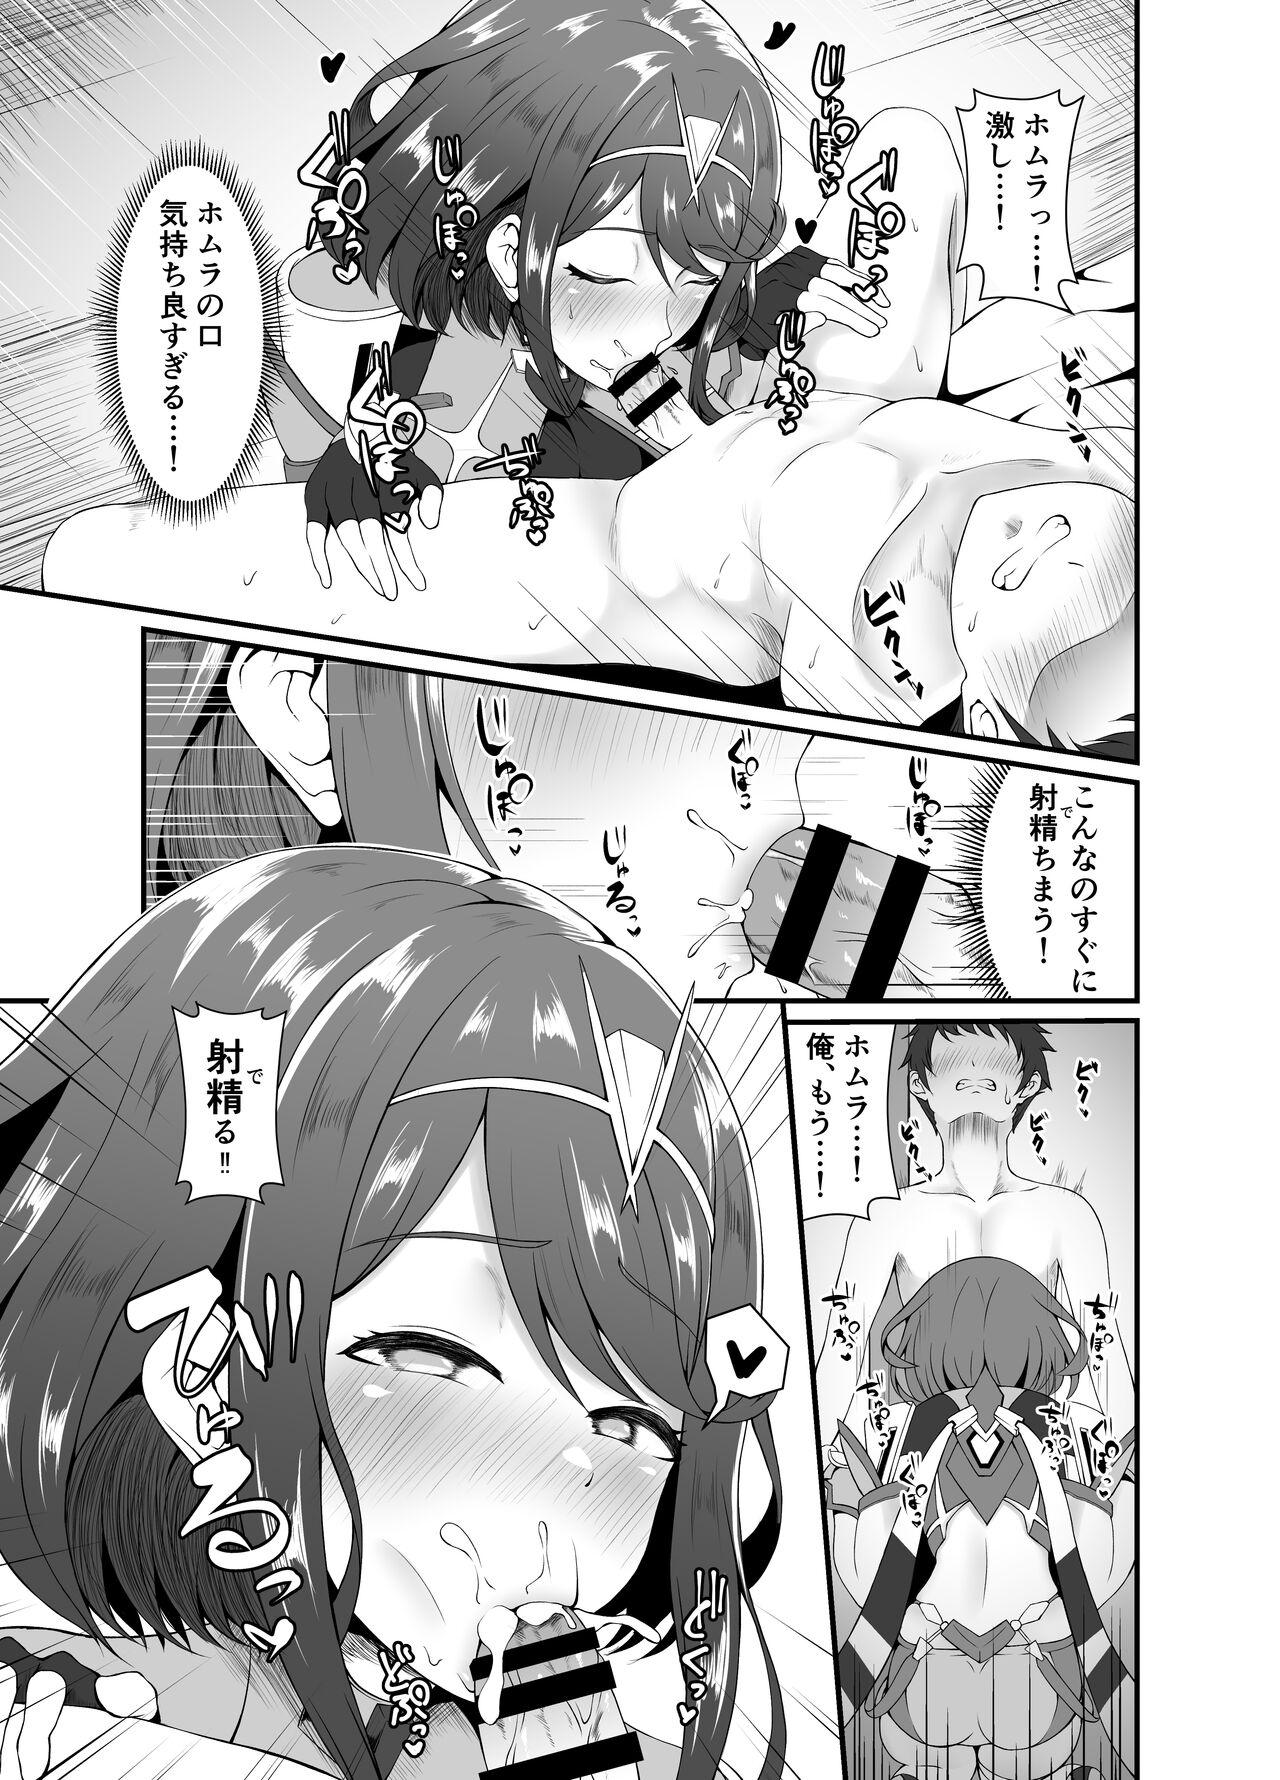 Flaquita 【ゼノブレ2】君と初めて繋がる日 - Xenoblade chronicles 2 Suck Cock - Page 5